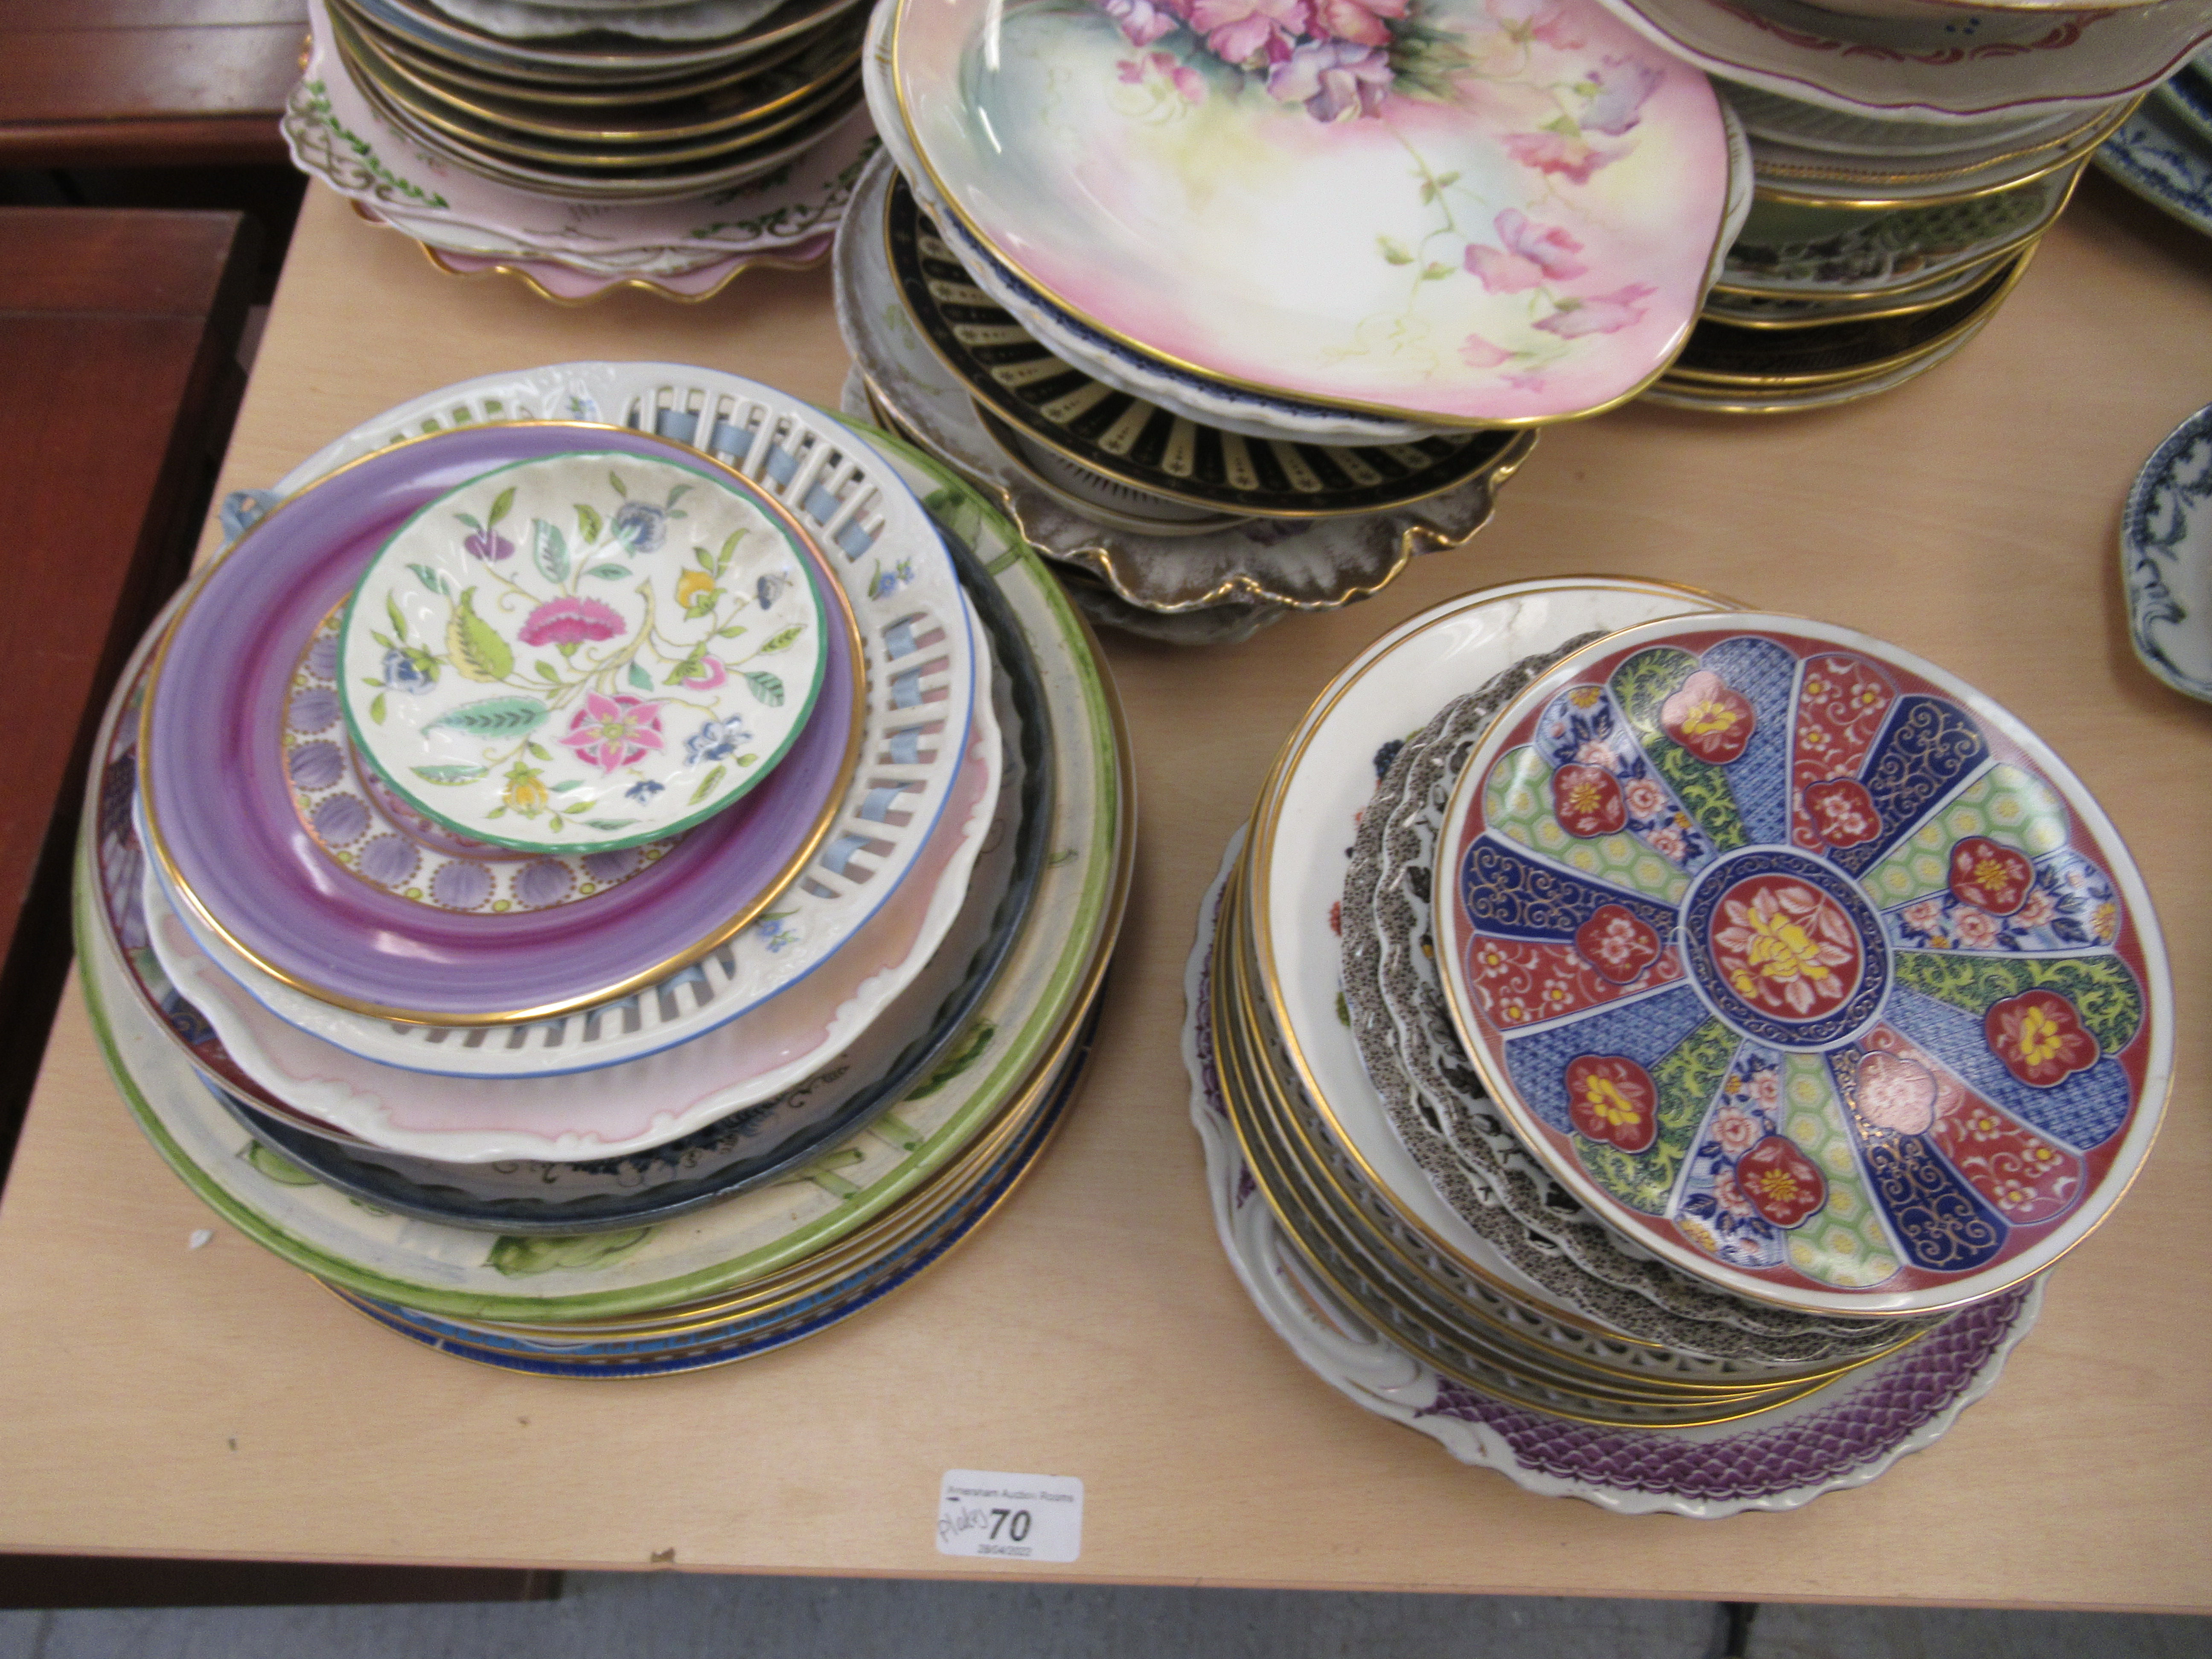 British and other European ceramic wall plates, some hand painted  various themes  largest 10"dia - Image 4 of 5